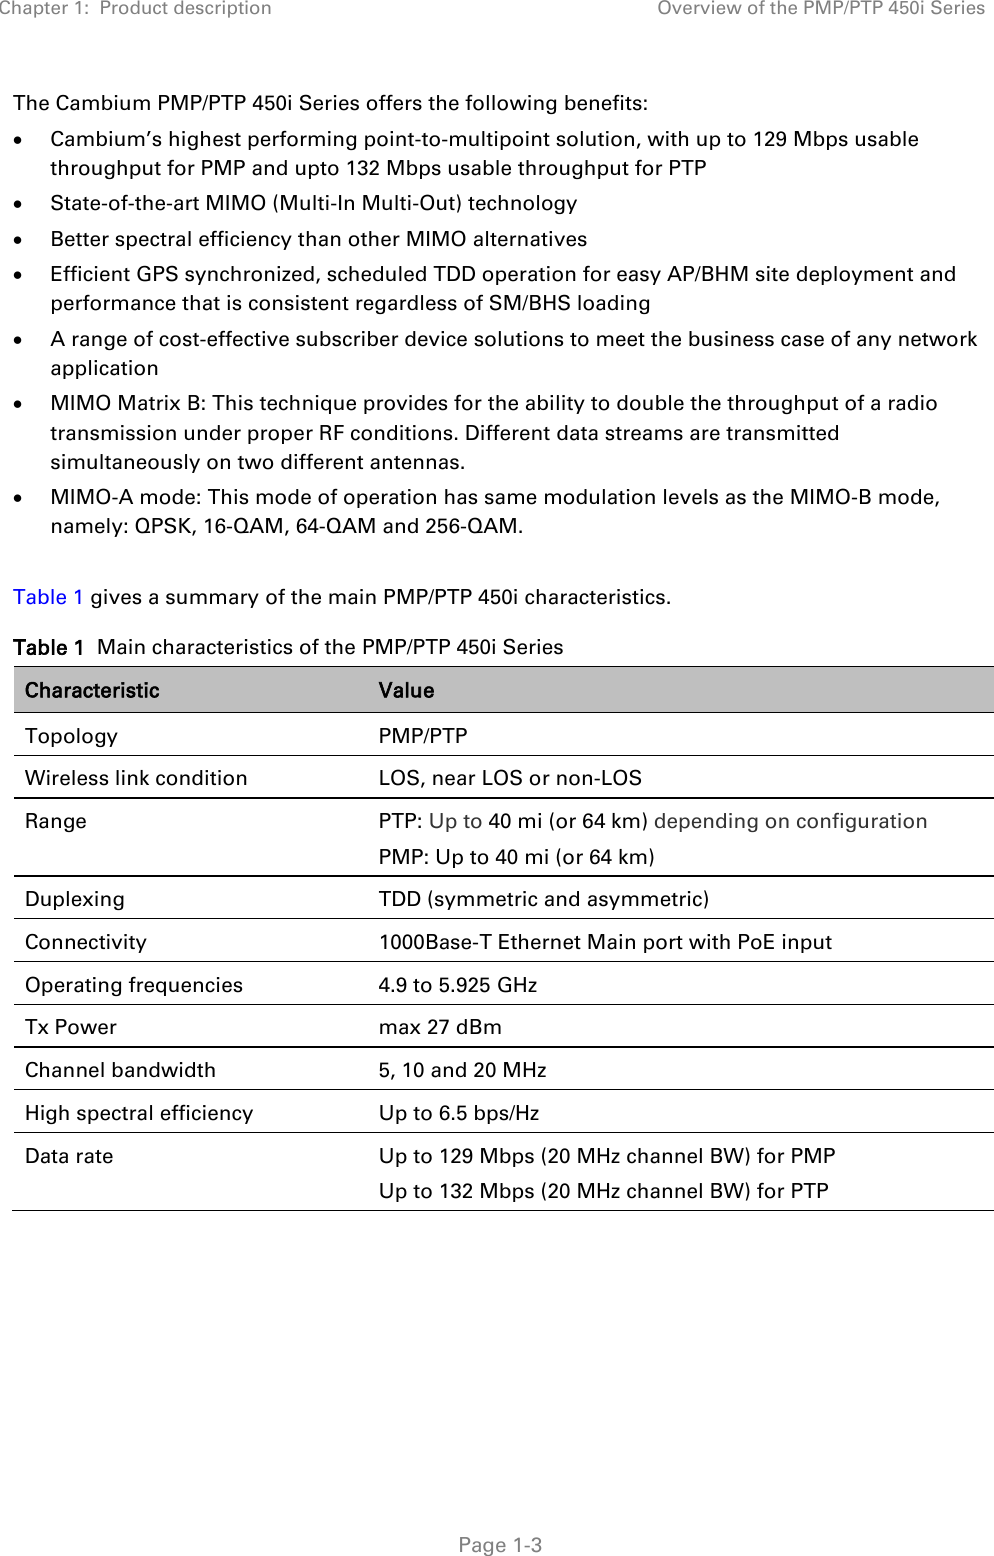 Chapter 1:  Product description Overview of the PMP/PTP 450i Series   Page 1-3 The Cambium PMP/PTP 450i Series offers the following benefits: • Cambium’s highest performing point-to-multipoint solution, with up to 129 Mbps usable throughput for PMP and upto 132 Mbps usable throughput for PTP • State-of-the-art MIMO (Multi-In Multi-Out) technology • Better spectral efficiency than other MIMO alternatives • Efficient GPS synchronized, scheduled TDD operation for easy AP/BHM site deployment and performance that is consistent regardless of SM/BHS loading • A range of cost-effective subscriber device solutions to meet the business case of any network application • MIMO Matrix B: This technique provides for the ability to double the throughput of a radio transmission under proper RF conditions. Different data streams are transmitted simultaneously on two different antennas. • MIMO-A mode: This mode of operation has same modulation levels as the MIMO-B mode, namely: QPSK, 16-QAM, 64-QAM and 256-QAM.  Table 1 gives a summary of the main PMP/PTP 450i characteristics. Table 1  Main characteristics of the PMP/PTP 450i Series Characteristic Value Topology PMP/PTP Wireless link condition LOS, near LOS or non-LOS Range PTP: Up to 40 mi (or 64 km) depending on configuration PMP: Up to 40 mi (or 64 km) Duplexing TDD (symmetric and asymmetric) Connectivity 1000Base-T Ethernet Main port with PoE input Operating frequencies 4.9 to 5.925 GHz Tx Power max 27 dBm Channel bandwidth 5, 10 and 20 MHz High spectral efficiency Up to 6.5 bps/Hz Data rate Up to 129 Mbps (20 MHz channel BW) for PMP Up to 132 Mbps (20 MHz channel BW) for PTP     